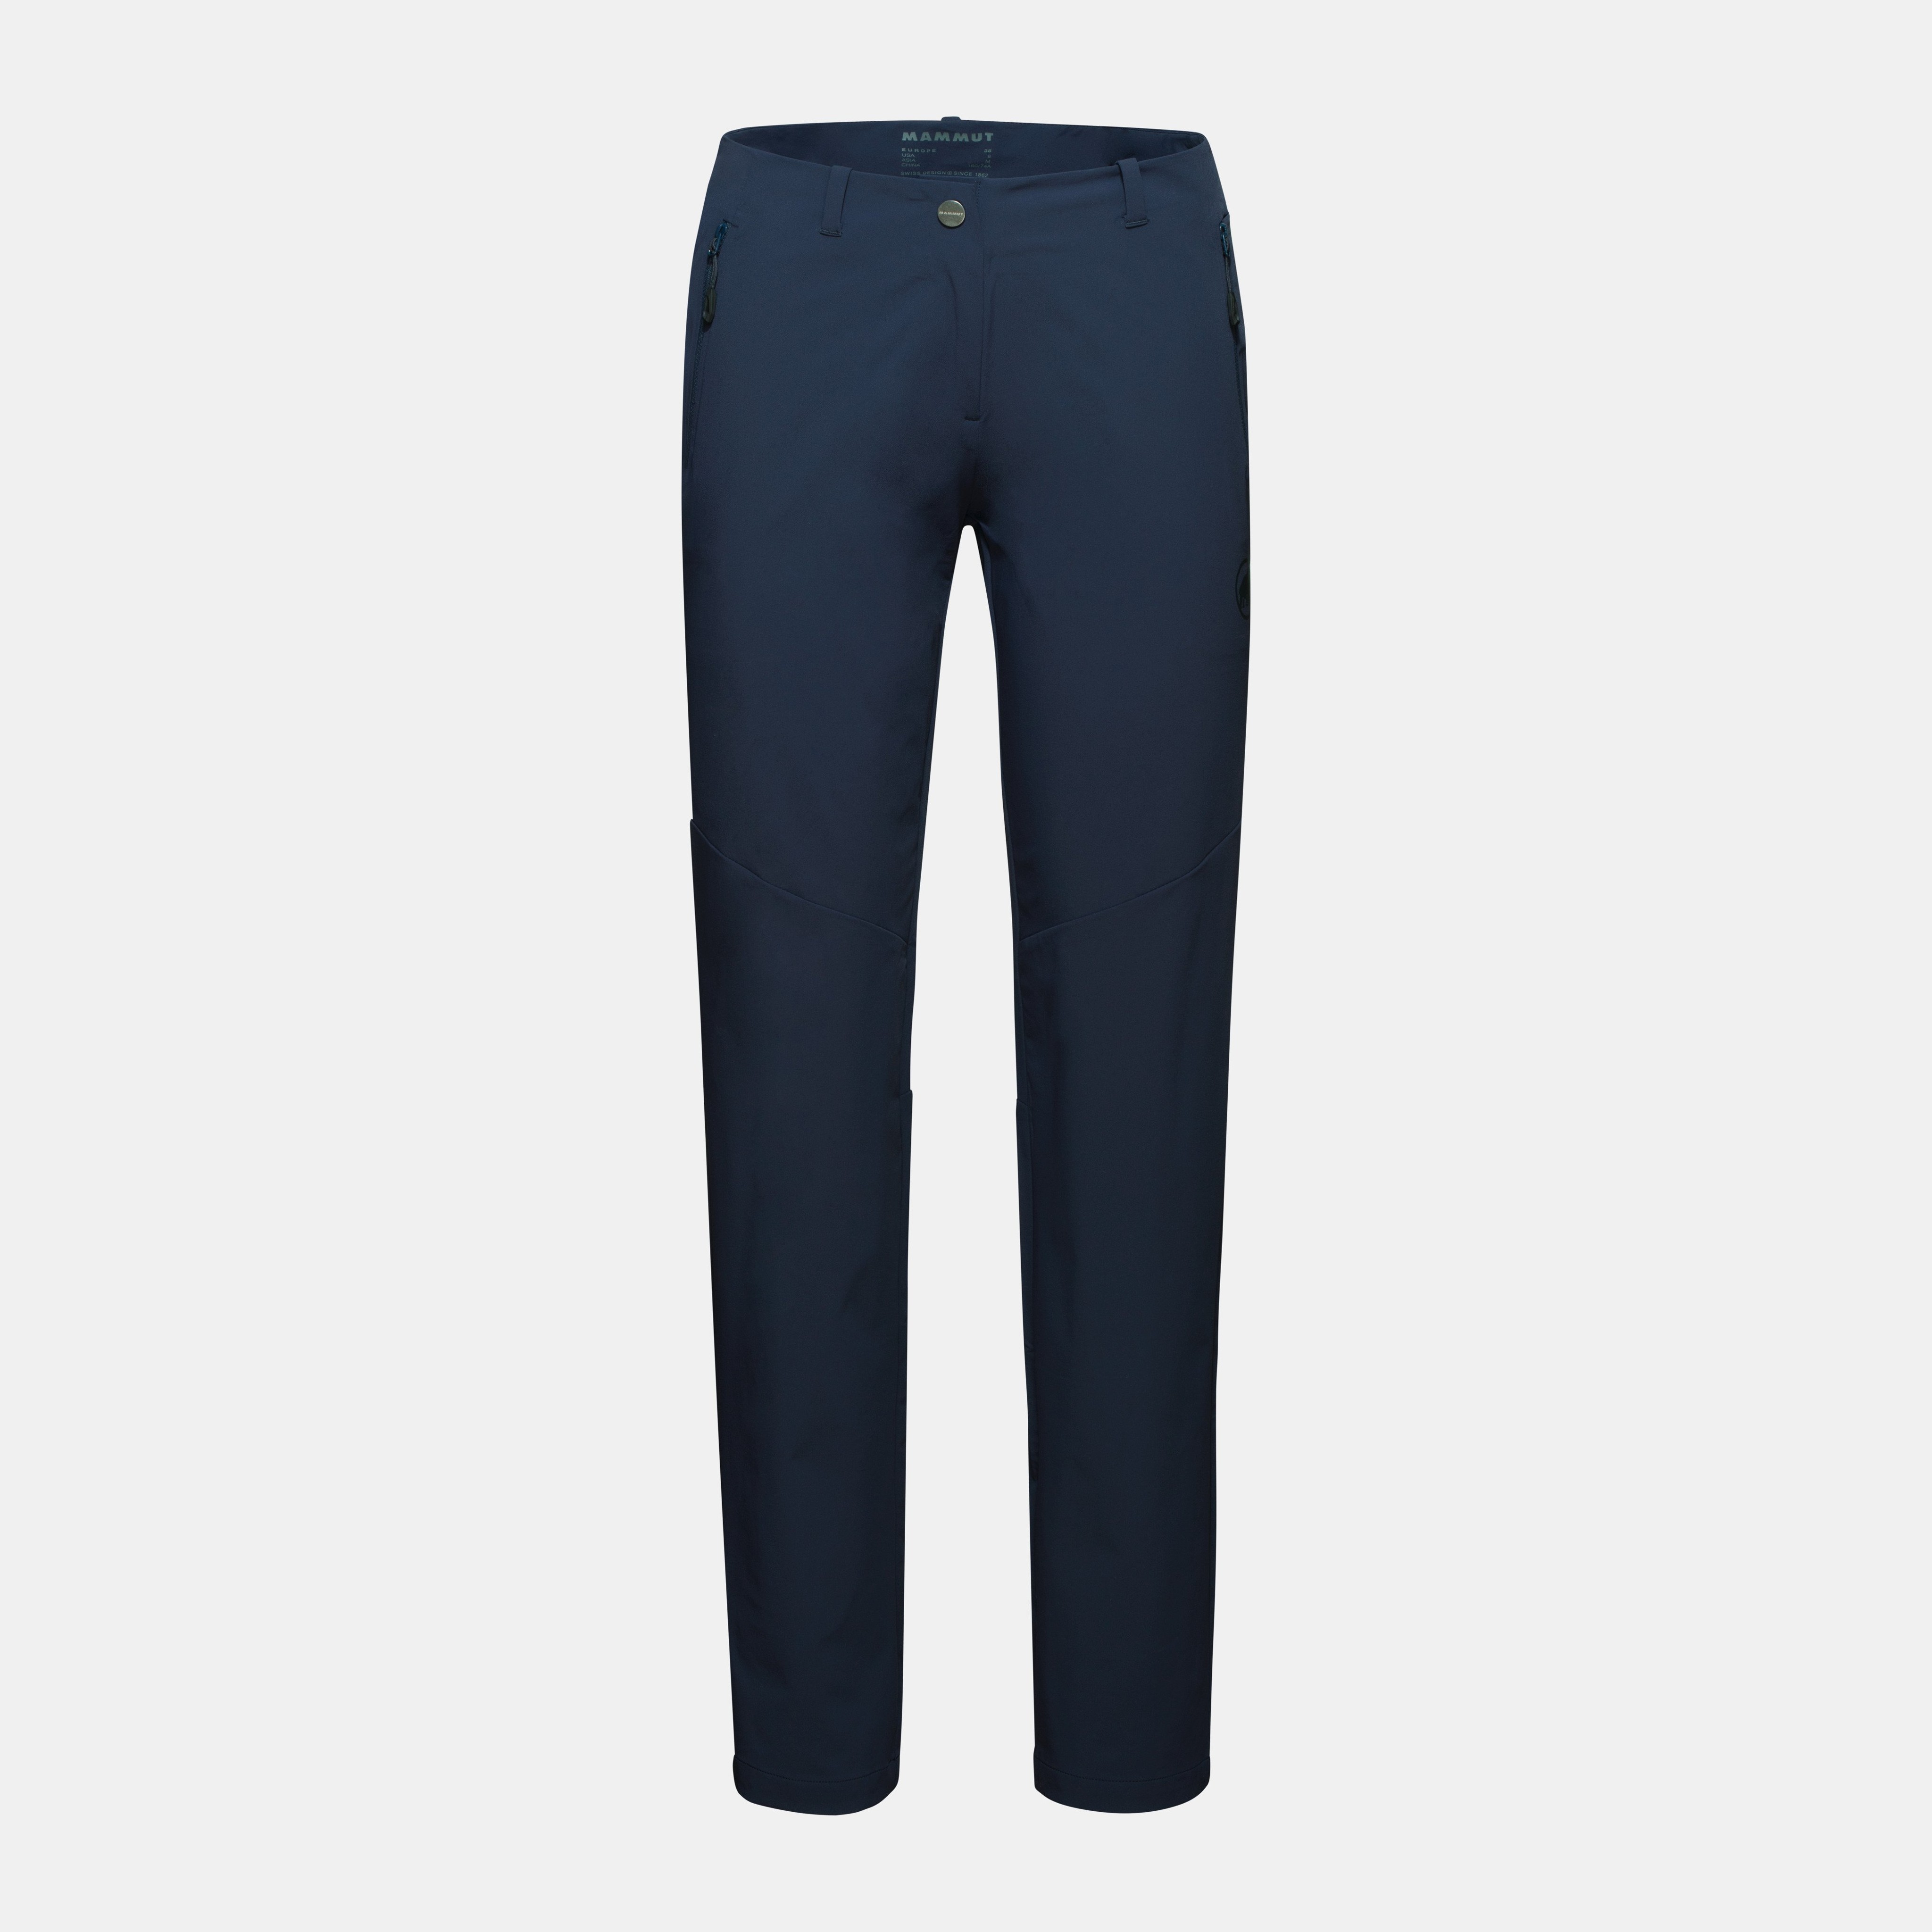 Runbold Guide SO Pants Women product image